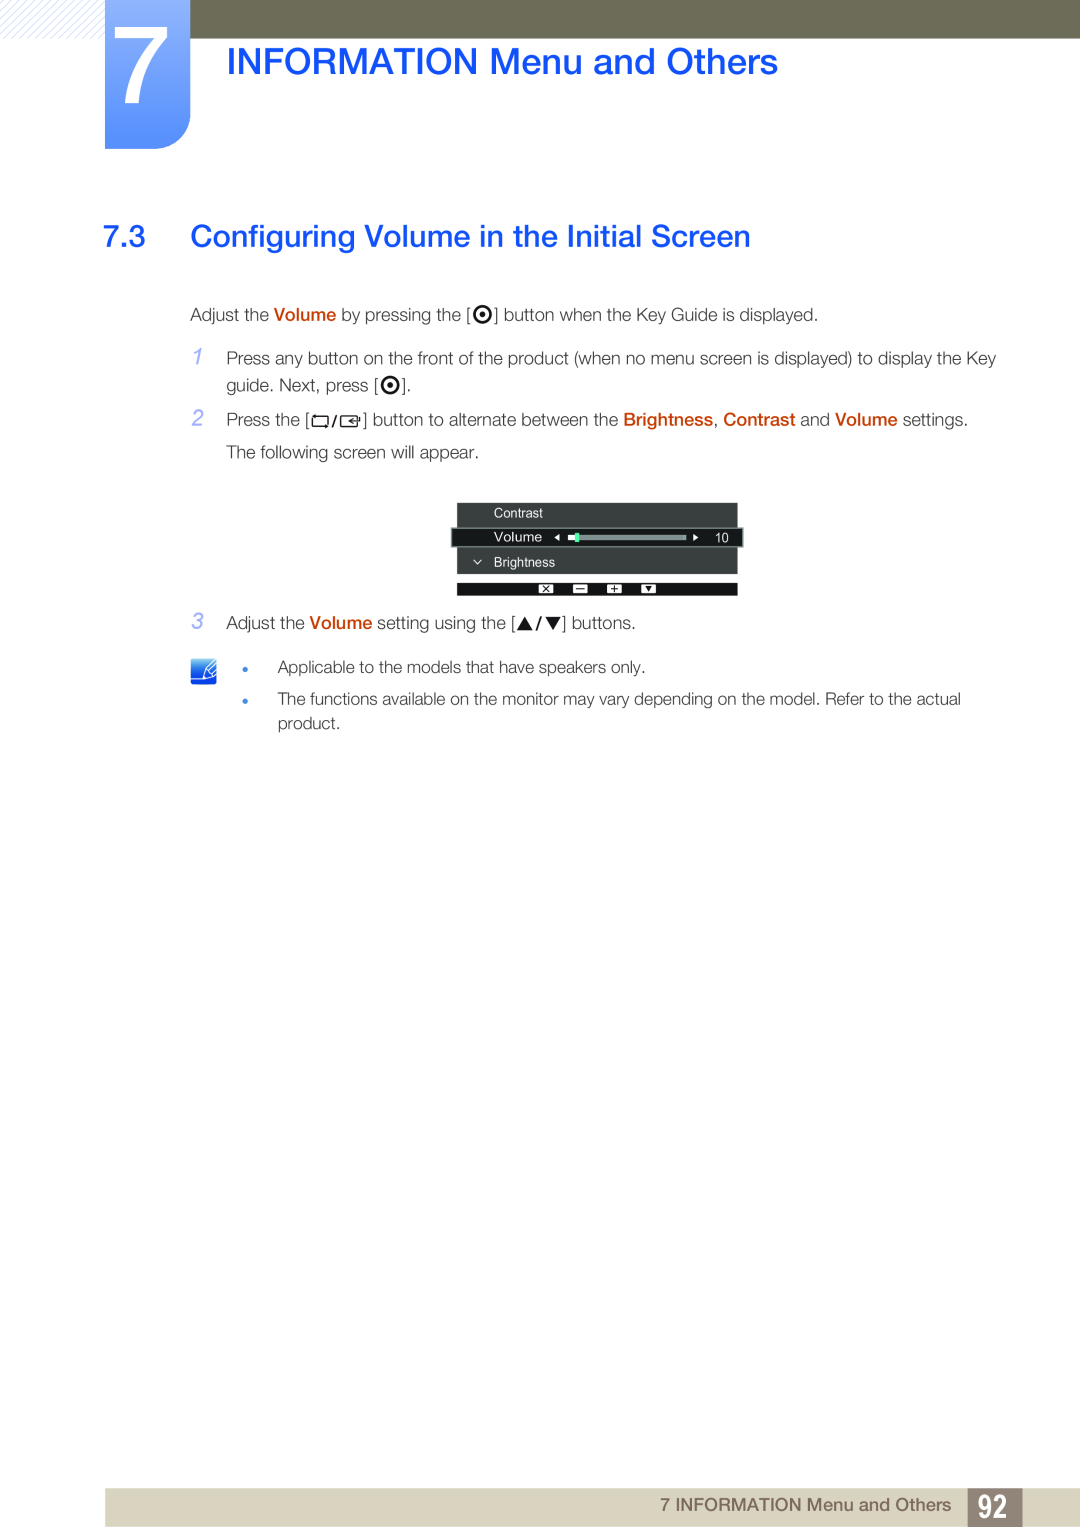 Samsung LS24E65UXWG/EN Configuring Volume in the Initial Screen, INFORMATION Menu and Others, Contrast Volume Brightness 